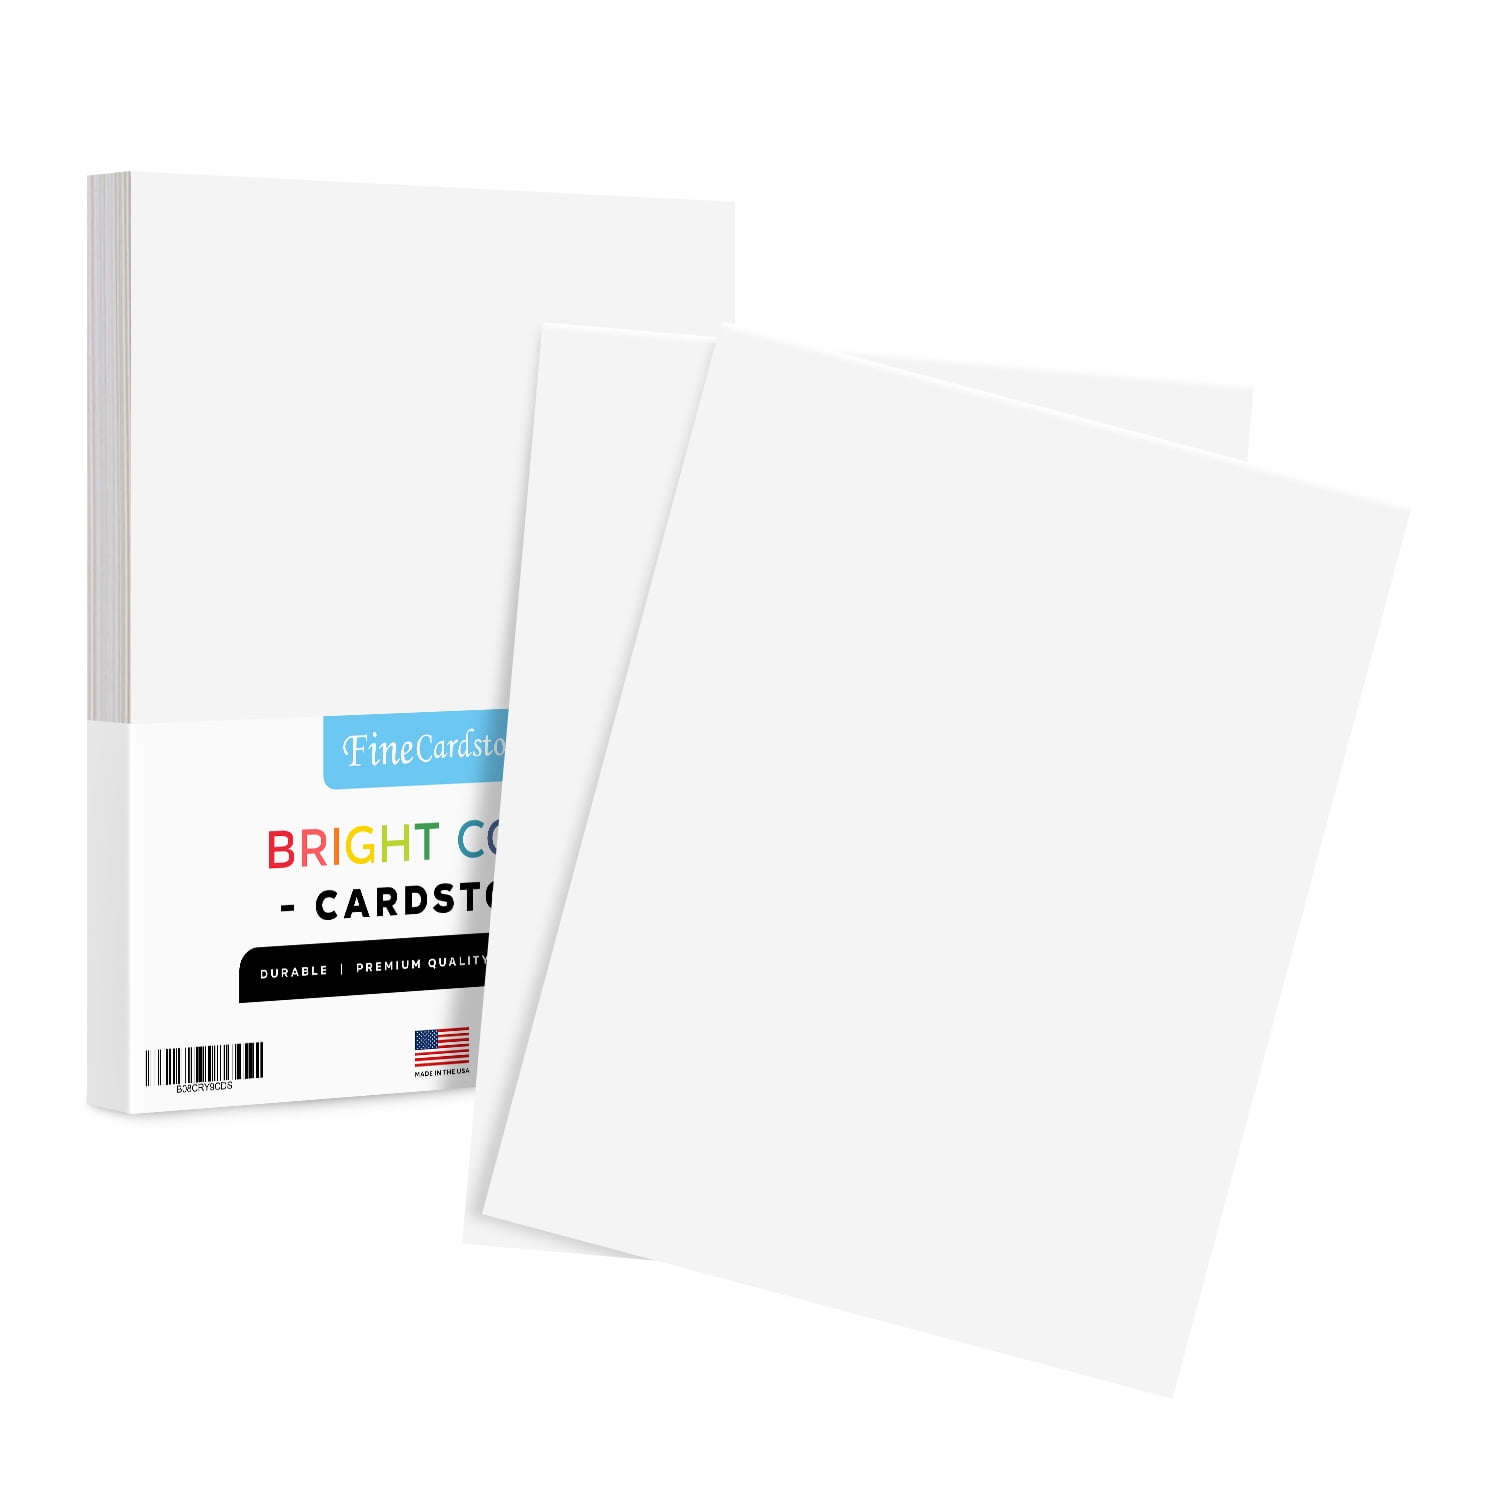 Paper 65 Lb Cover / Cardstock Neenah Astrobrights Premium Color Card Stock 11 x 17, Gamma Green 50 Sheets Per Pack by Superfine Printing Inc.